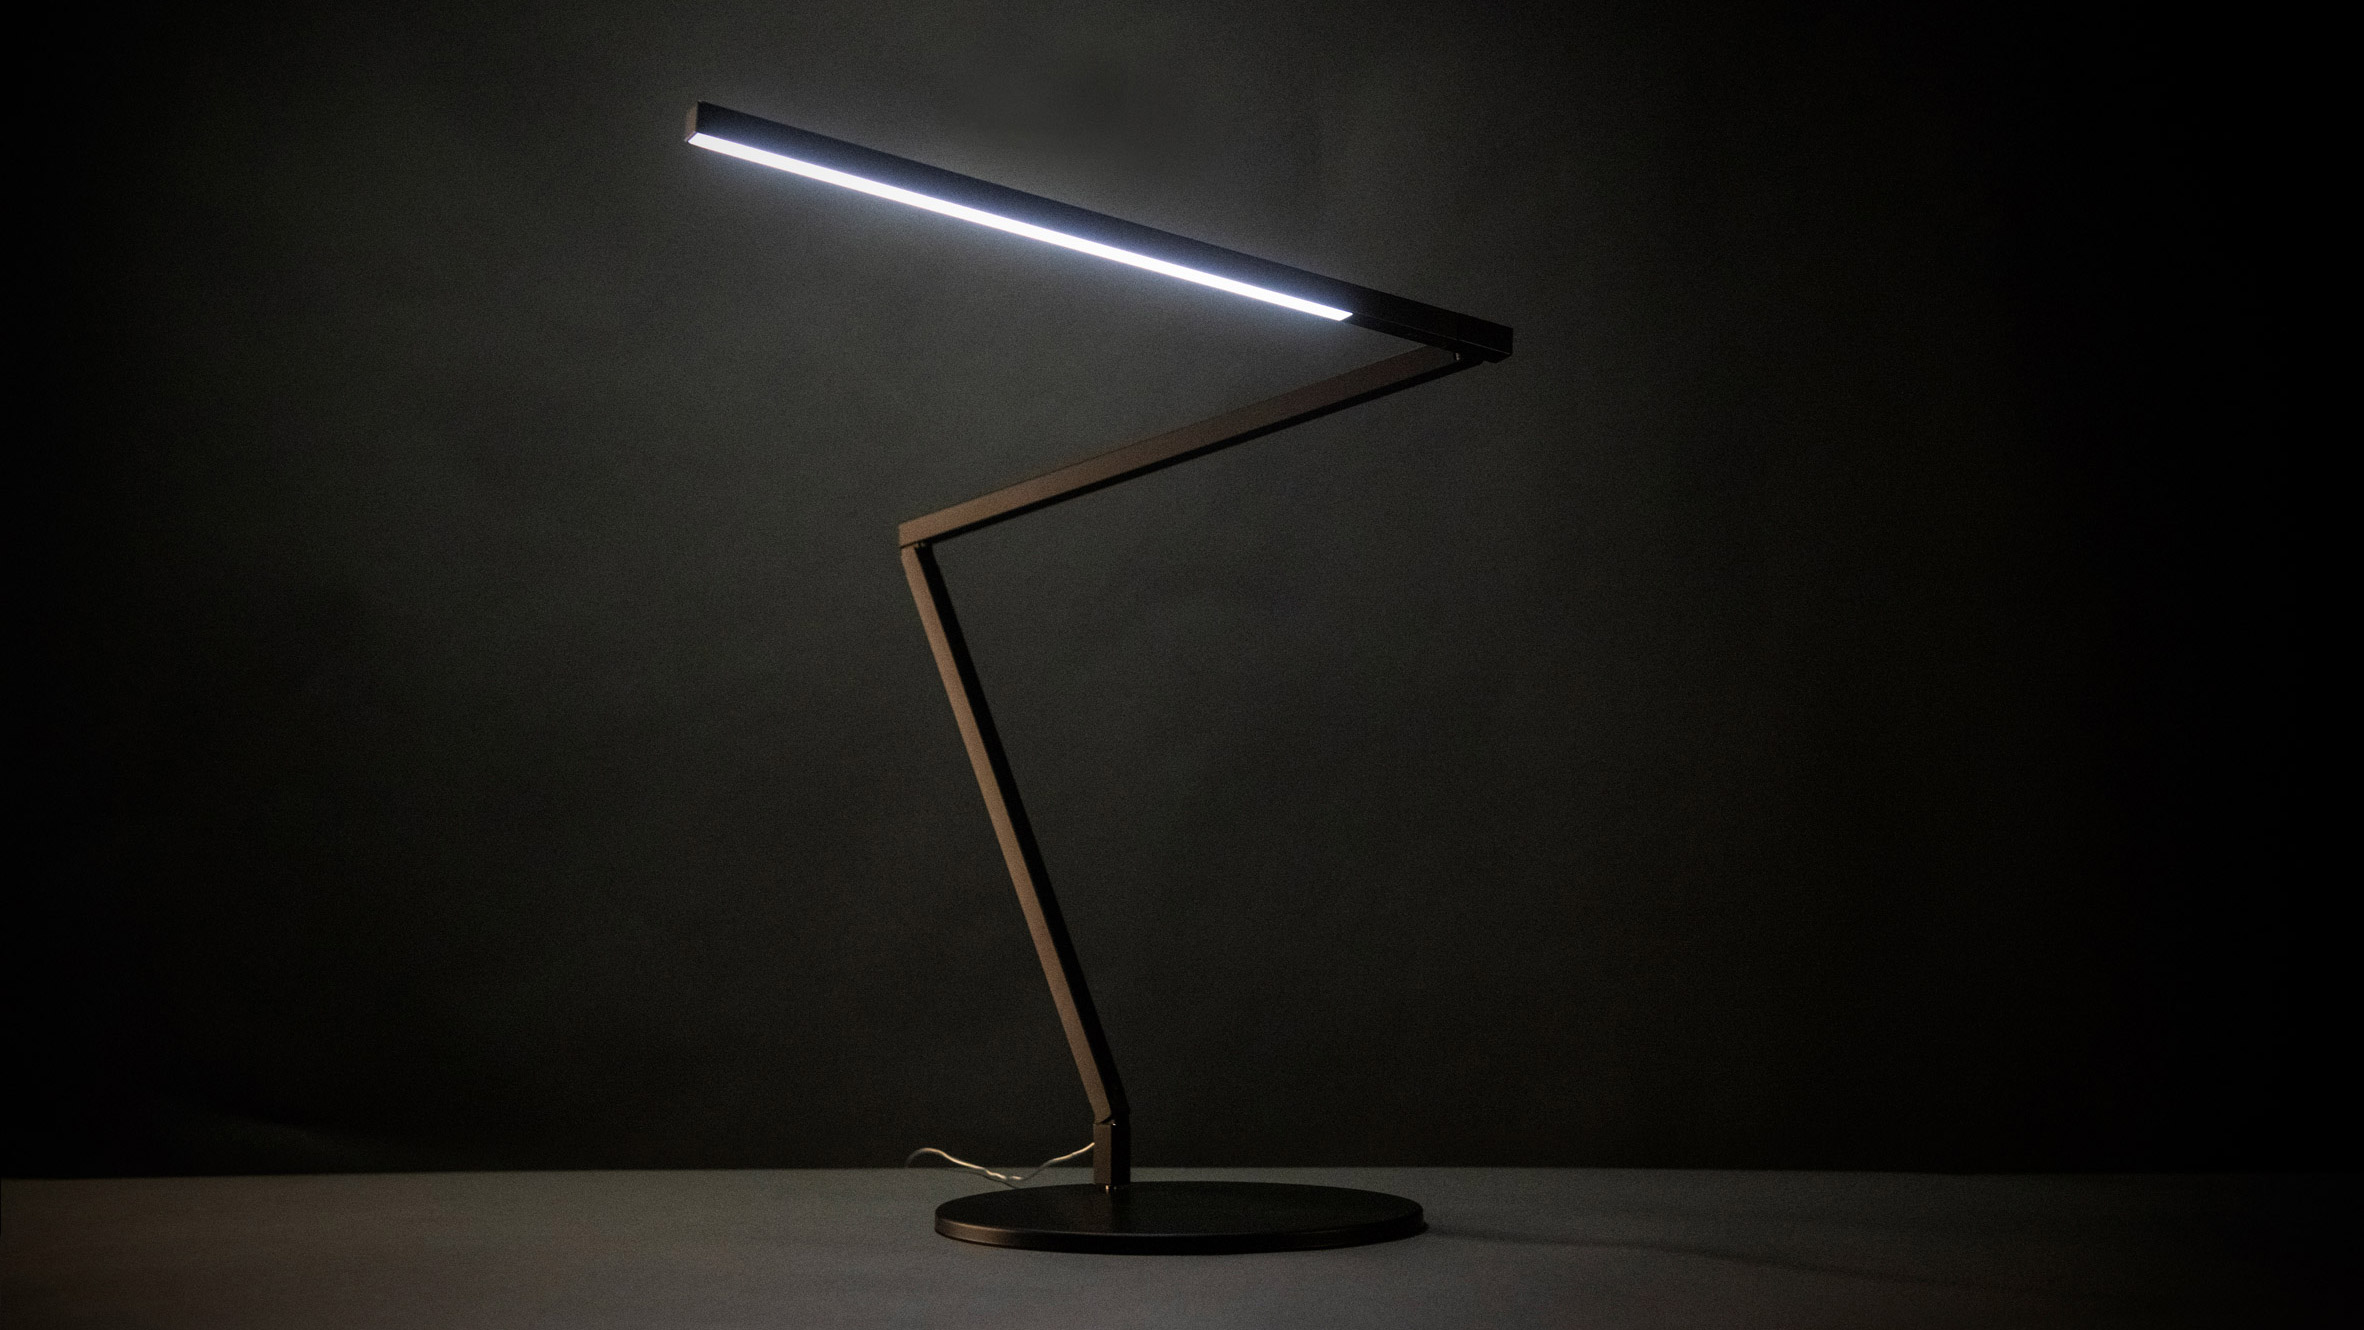 Z Bar Gen 4 Lamp By Kenneth Ng And